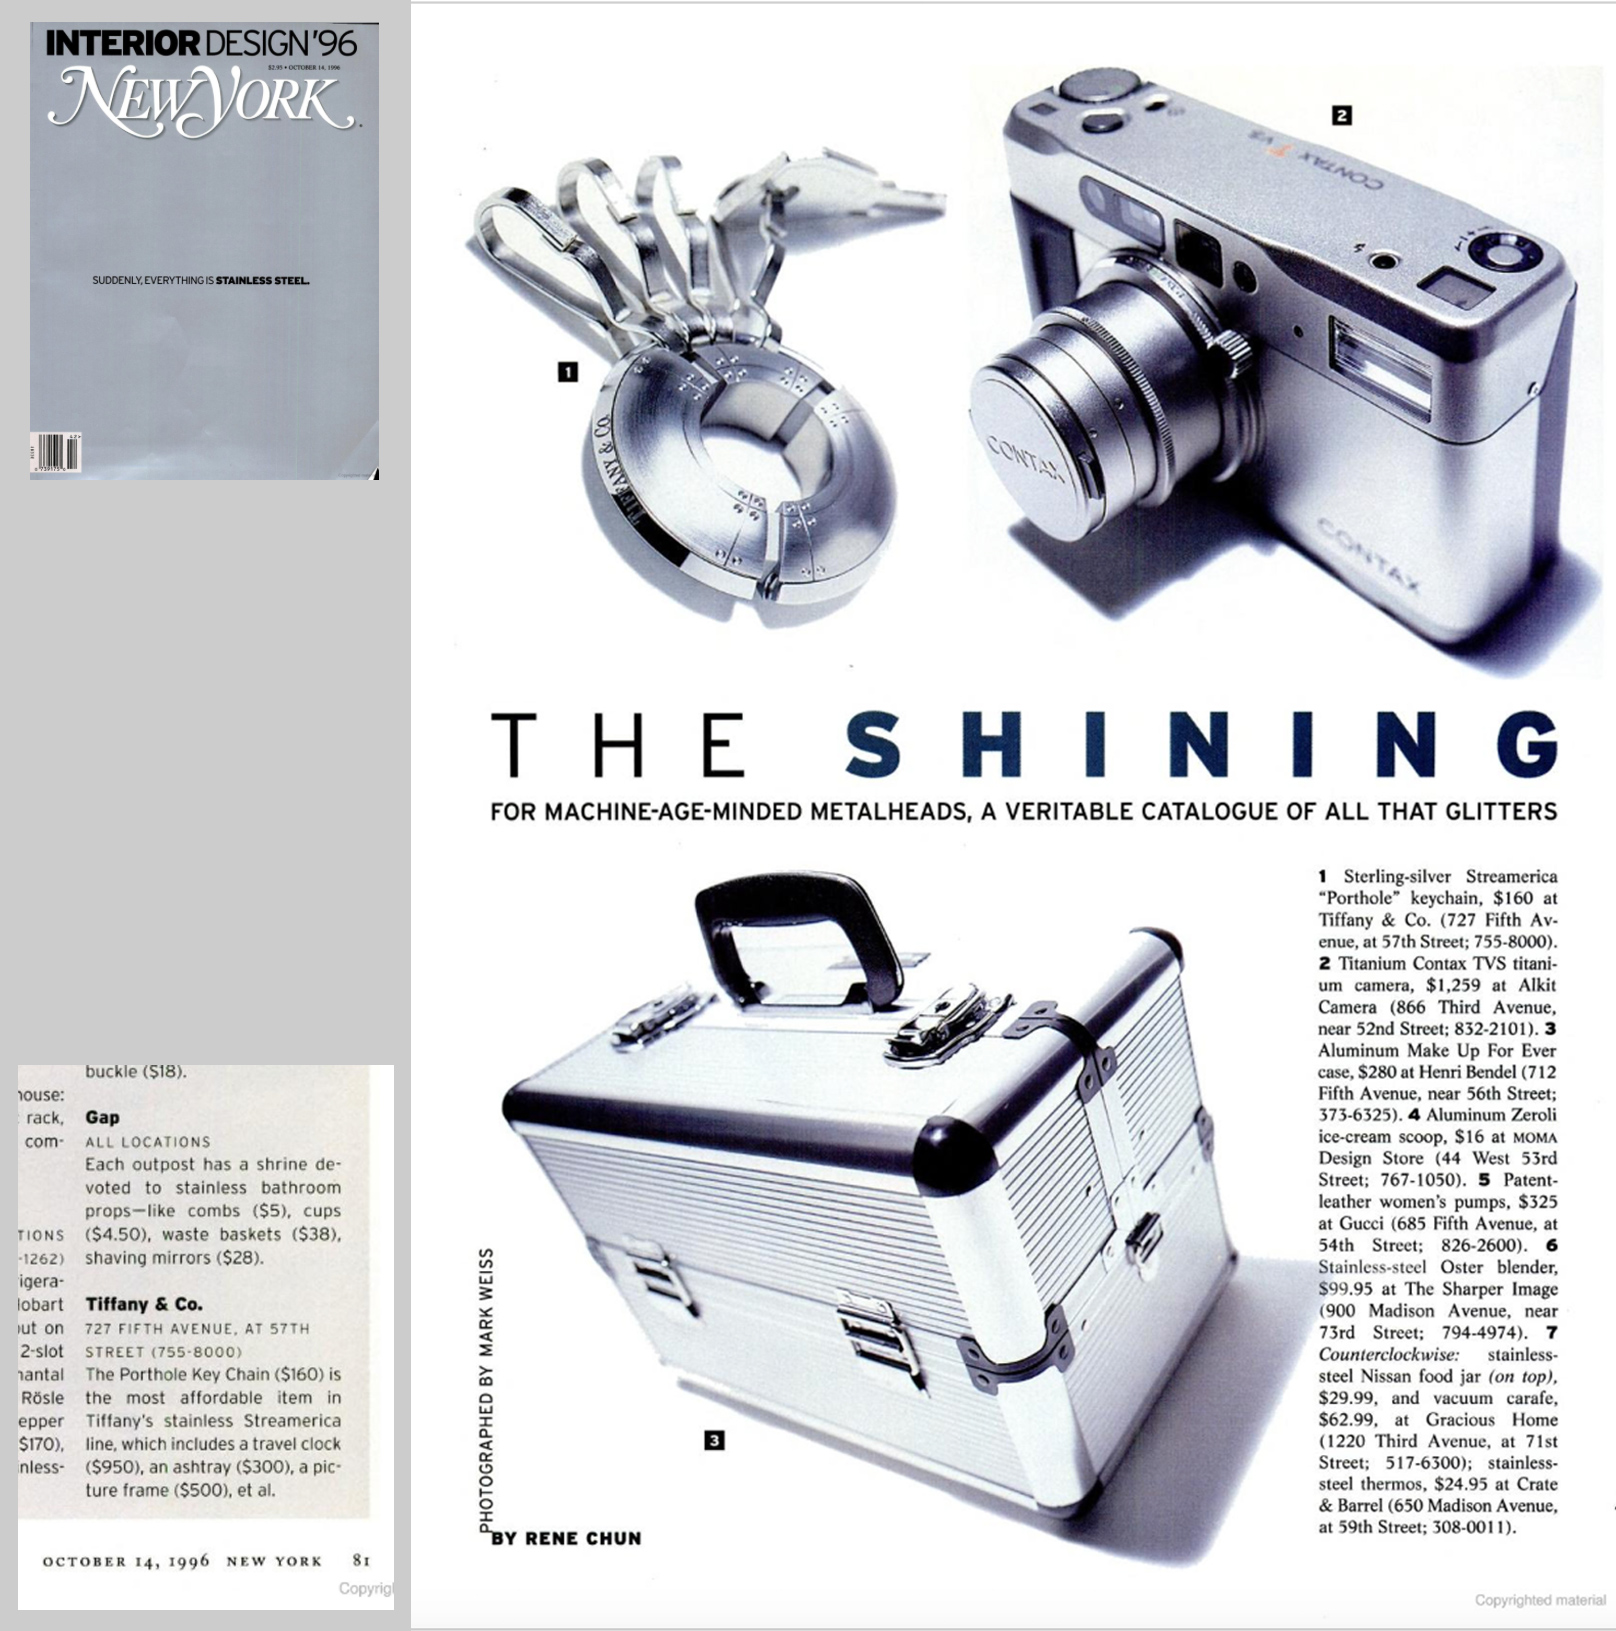 Advertisement Editorial Price Tiffany & Co. Streamerica Stainless Steel Collection Porthole Keychain Key ring Ads New York Magazine Oct 14, 1996 Worth